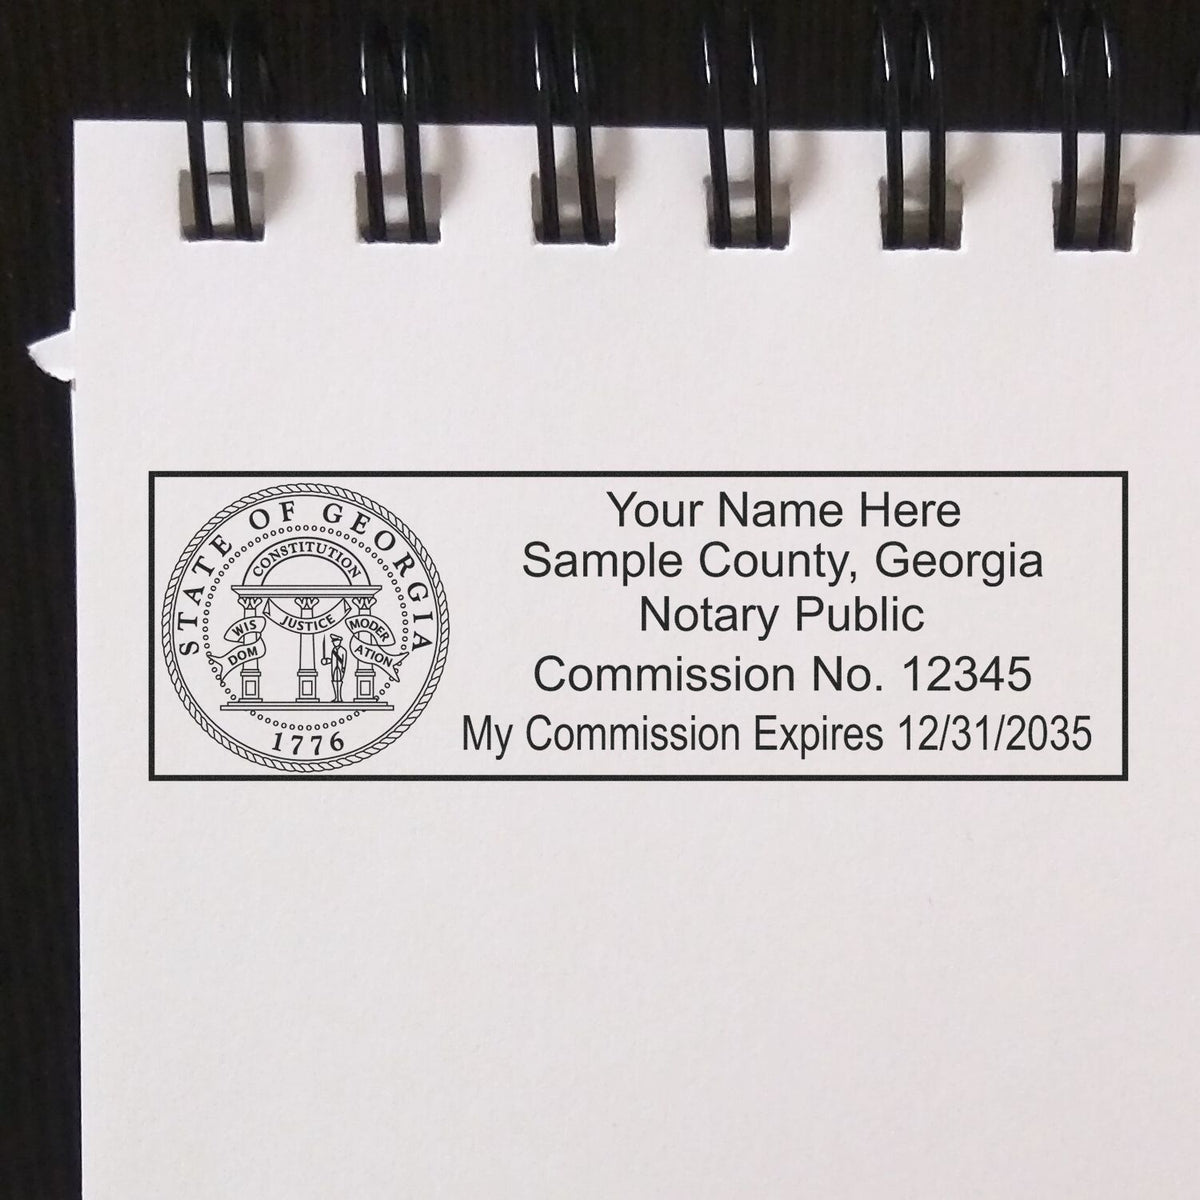 A photograph of the MaxLight Premium Pre-Inked Georgia Rectangular Notarial Stamp stamp impression reveals a vivid, professional image of the on paper.